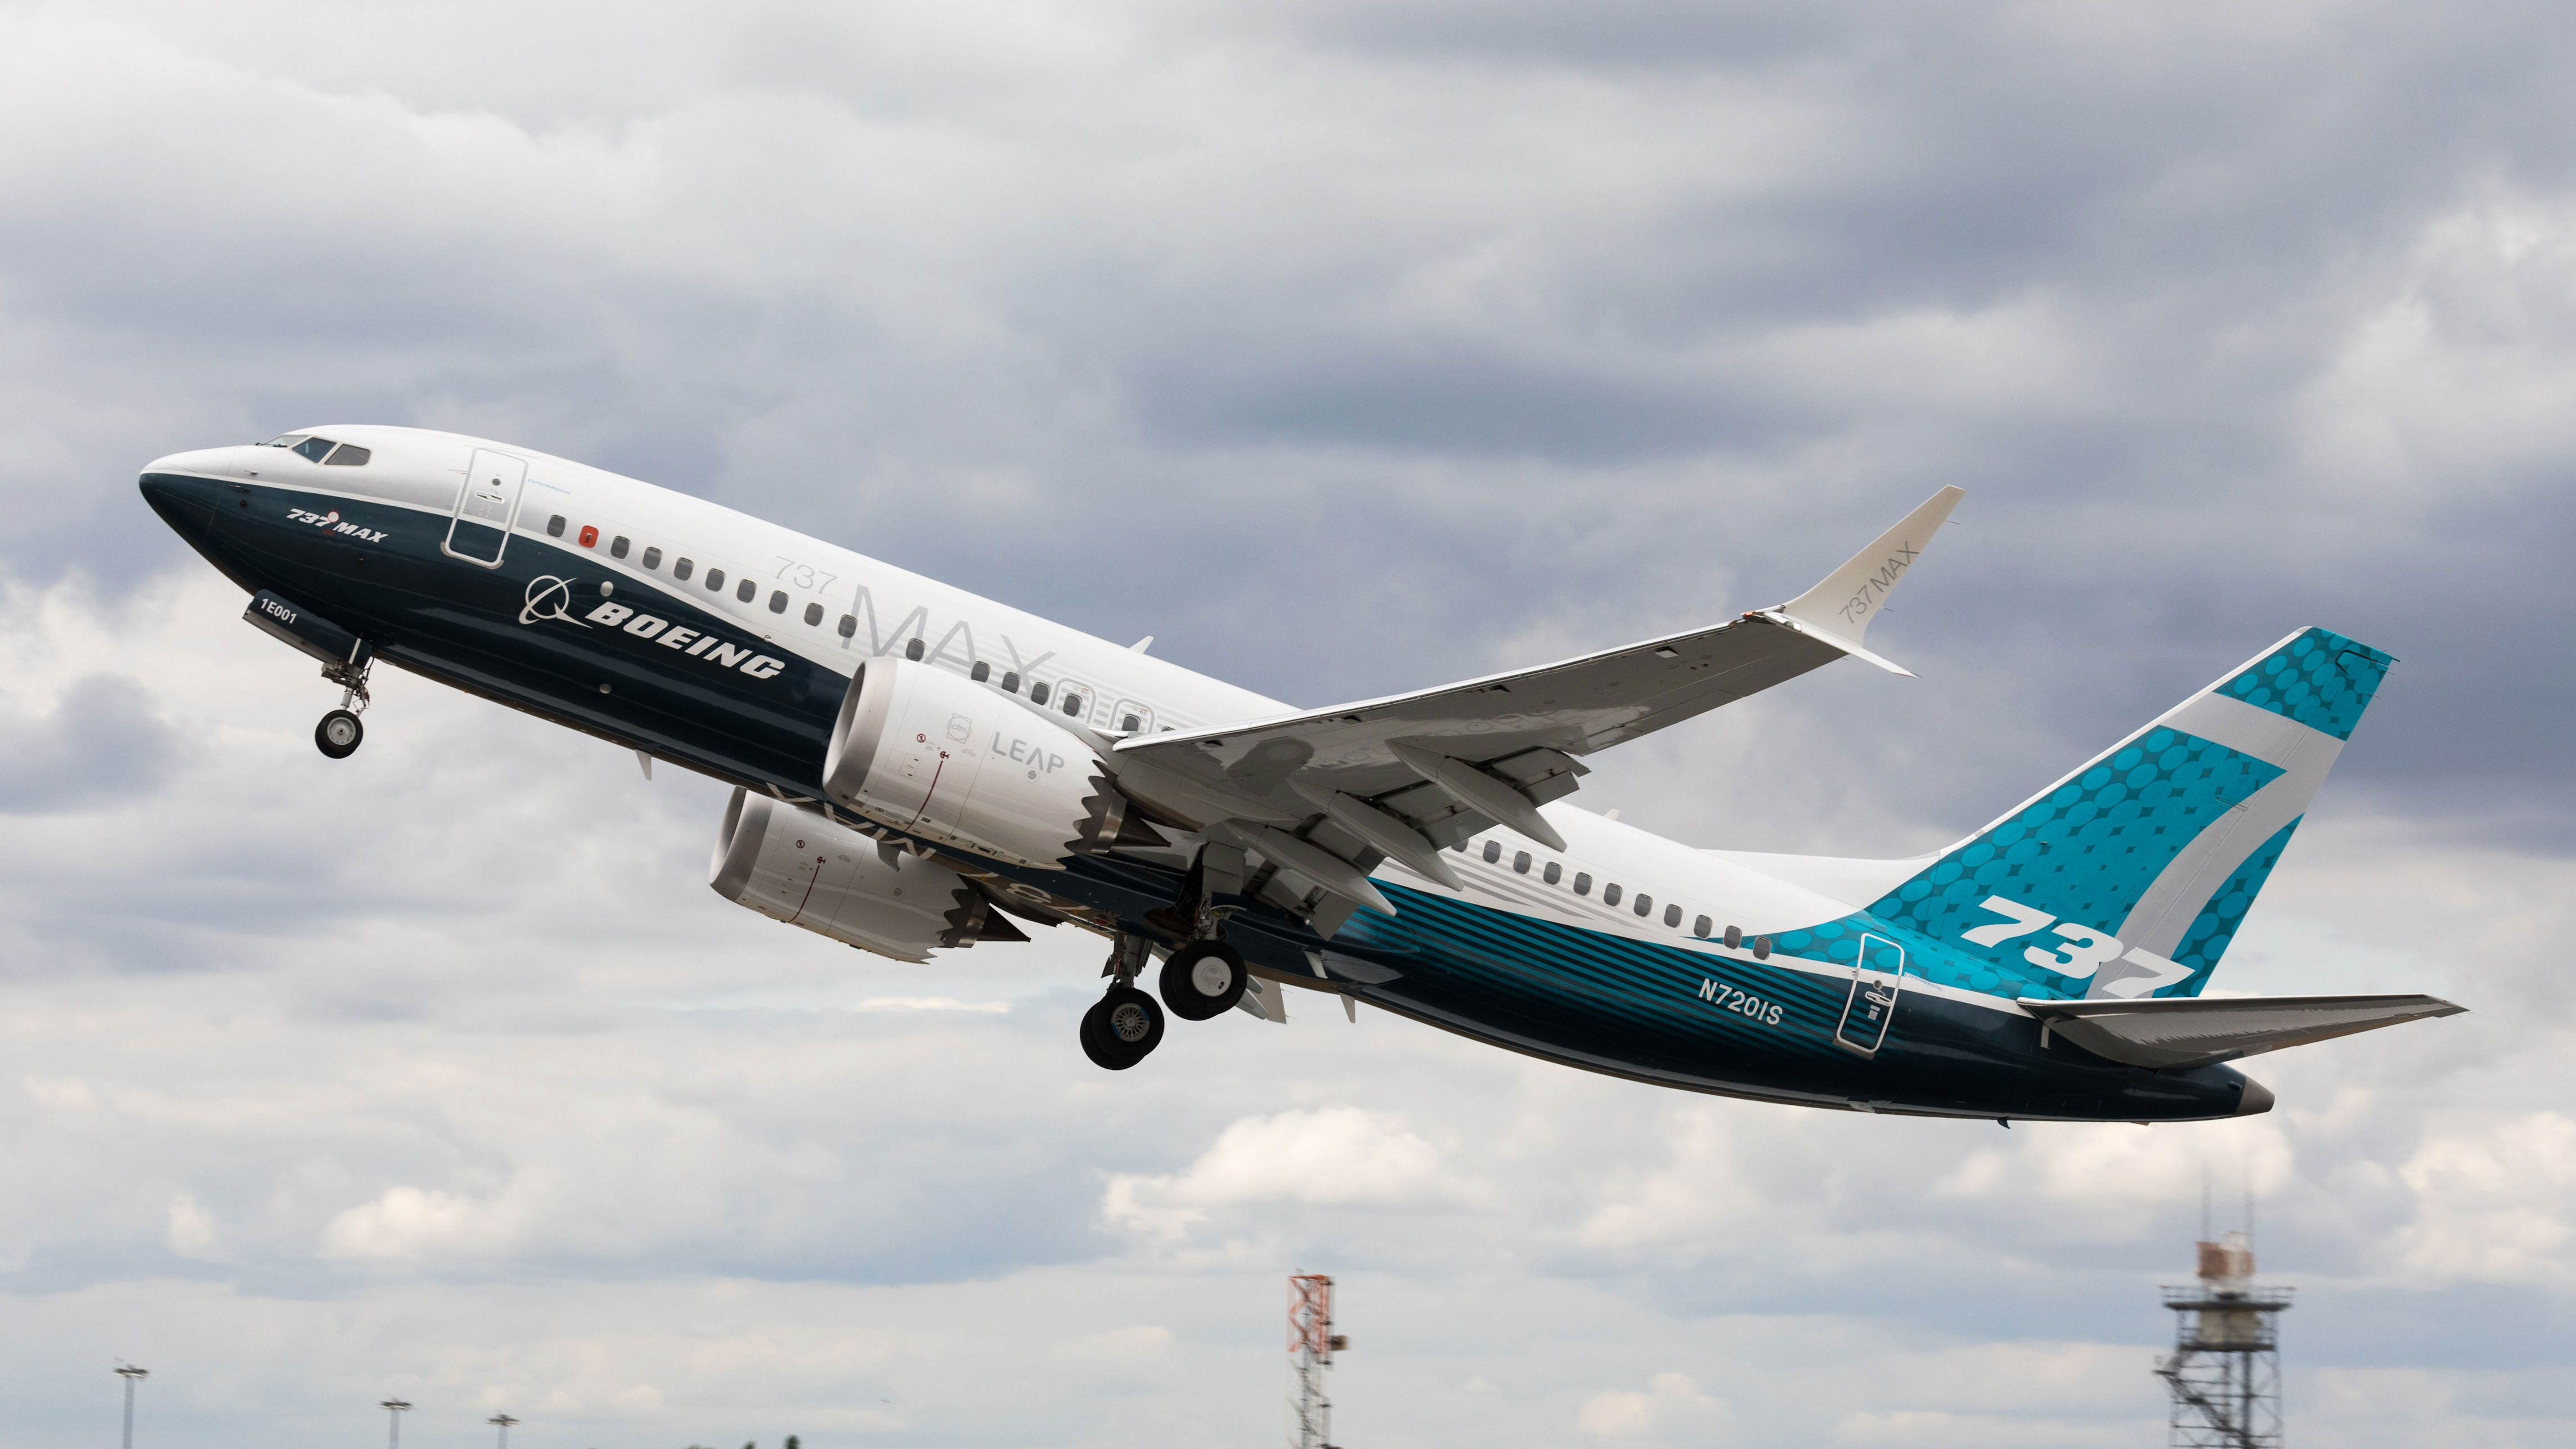 Boeing 737 MAX Program Faces New Supplier Defect Woes